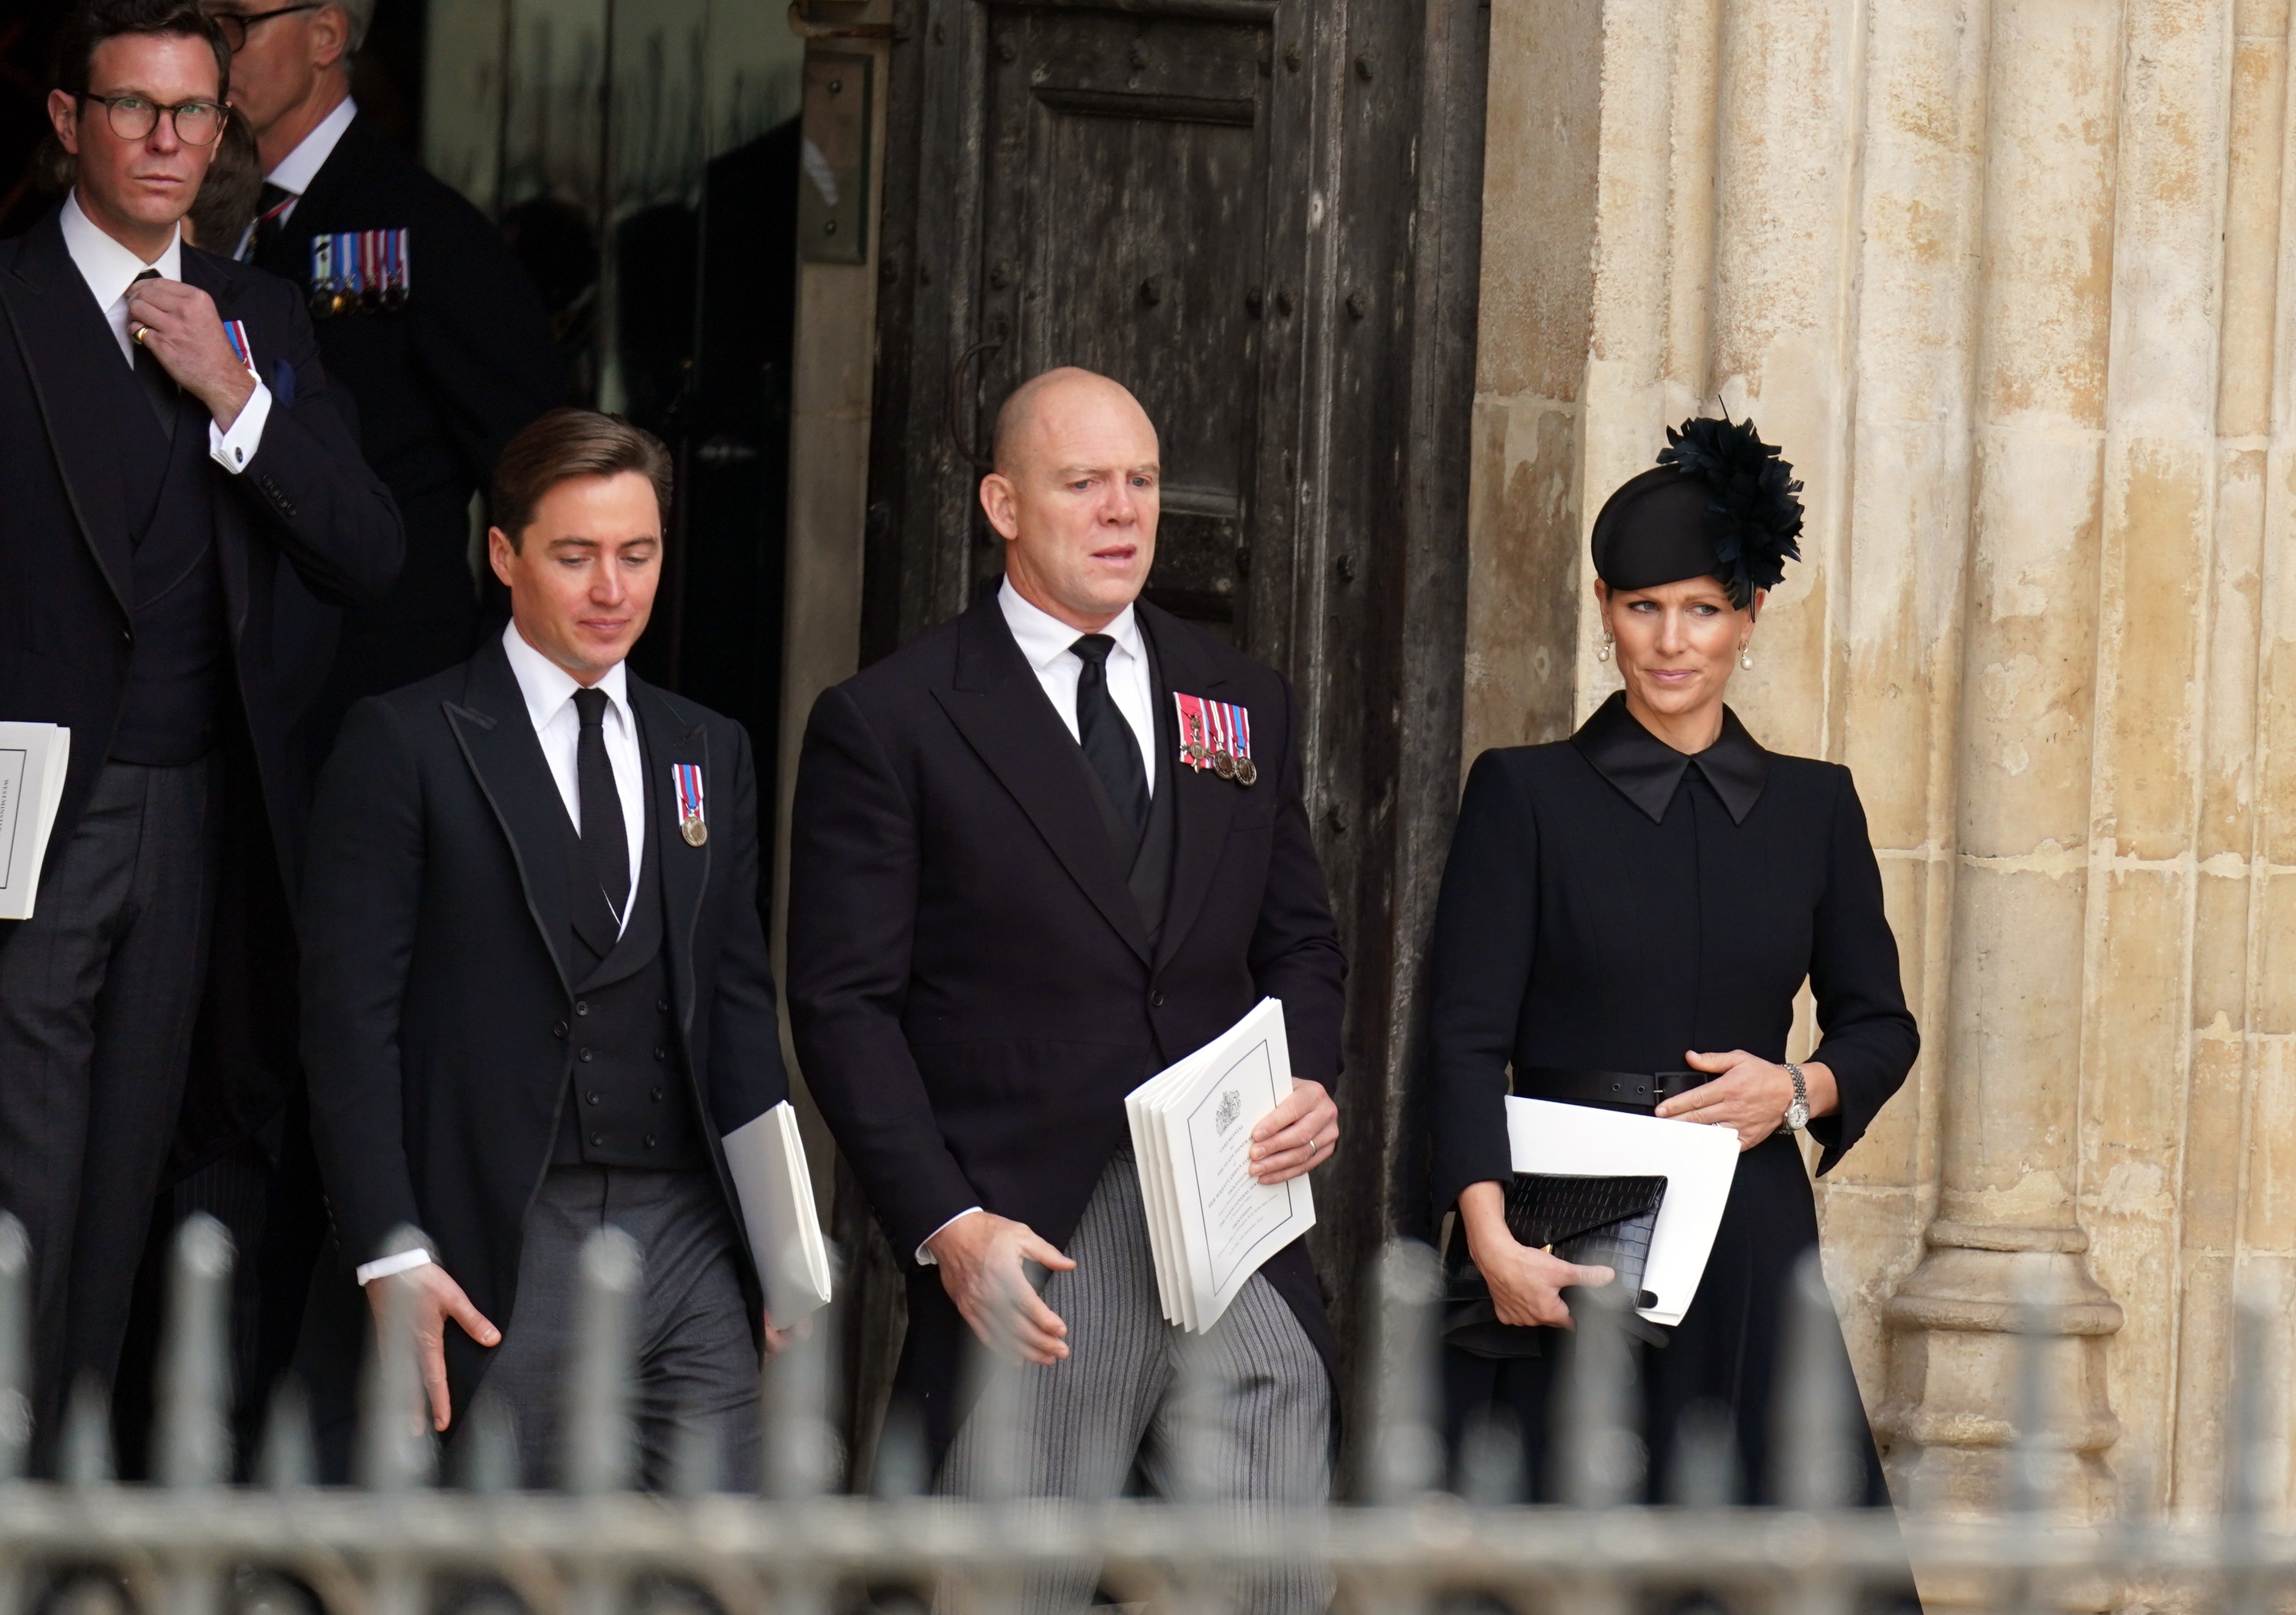 Zara Tindall (right), Mike Tindall (centre) and Edoardo Mapelli Mozzi, the husband of Princess Beatrice, following the Queen’s State Funeral (Andrew Milligan/PA)